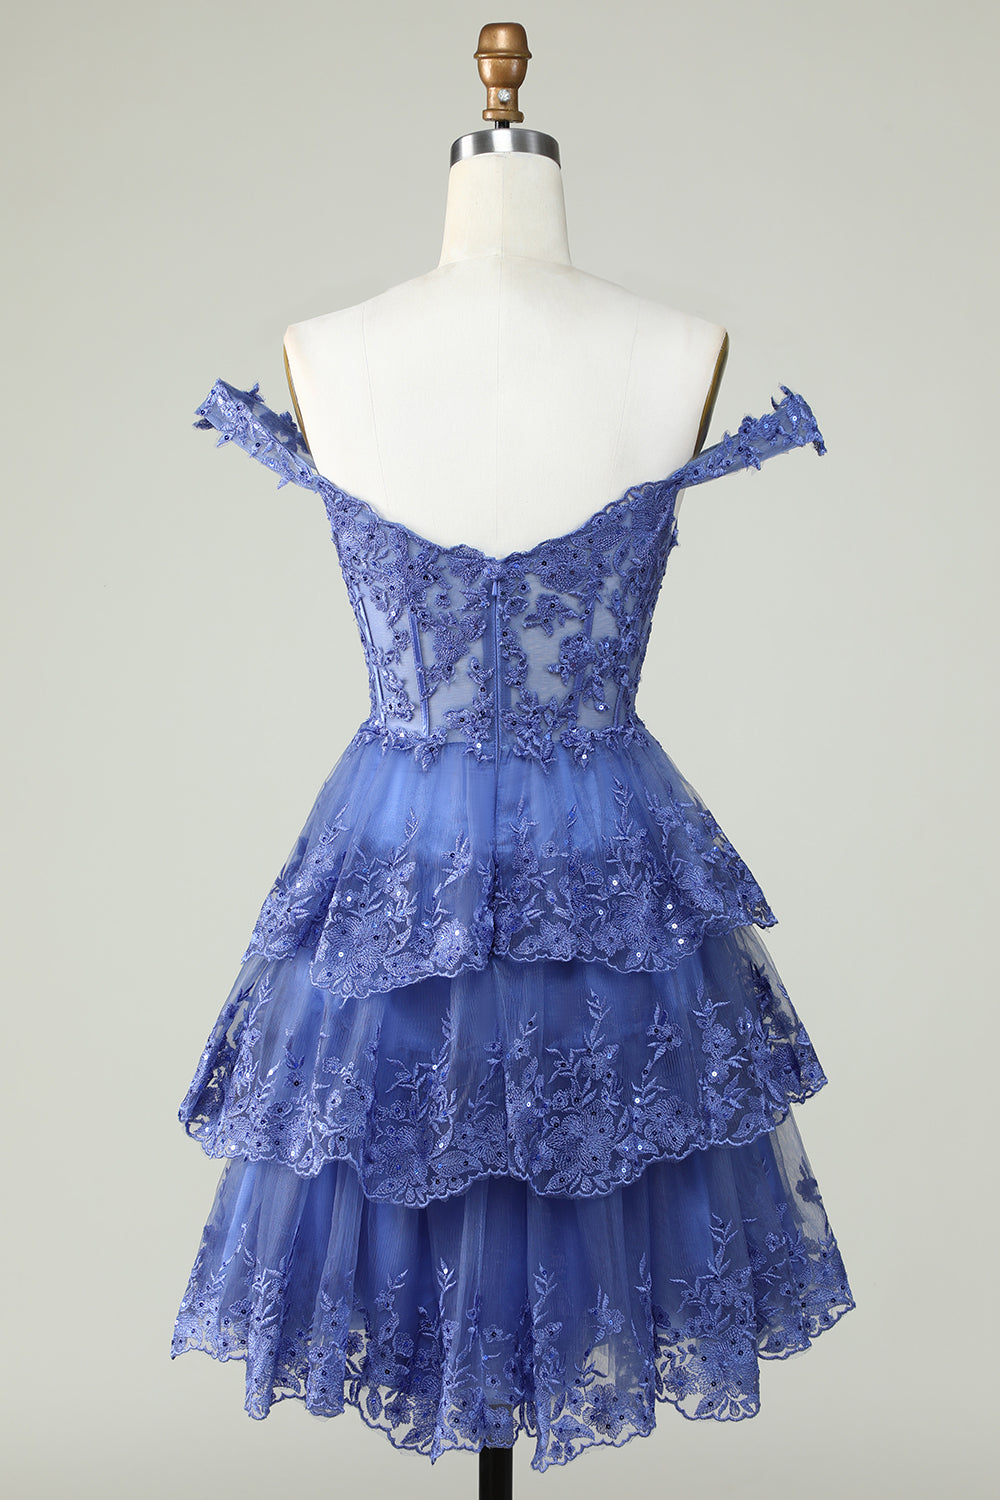 Cute A Line Dark Blue Corset Tiered Short Homecoming Dress with Lace